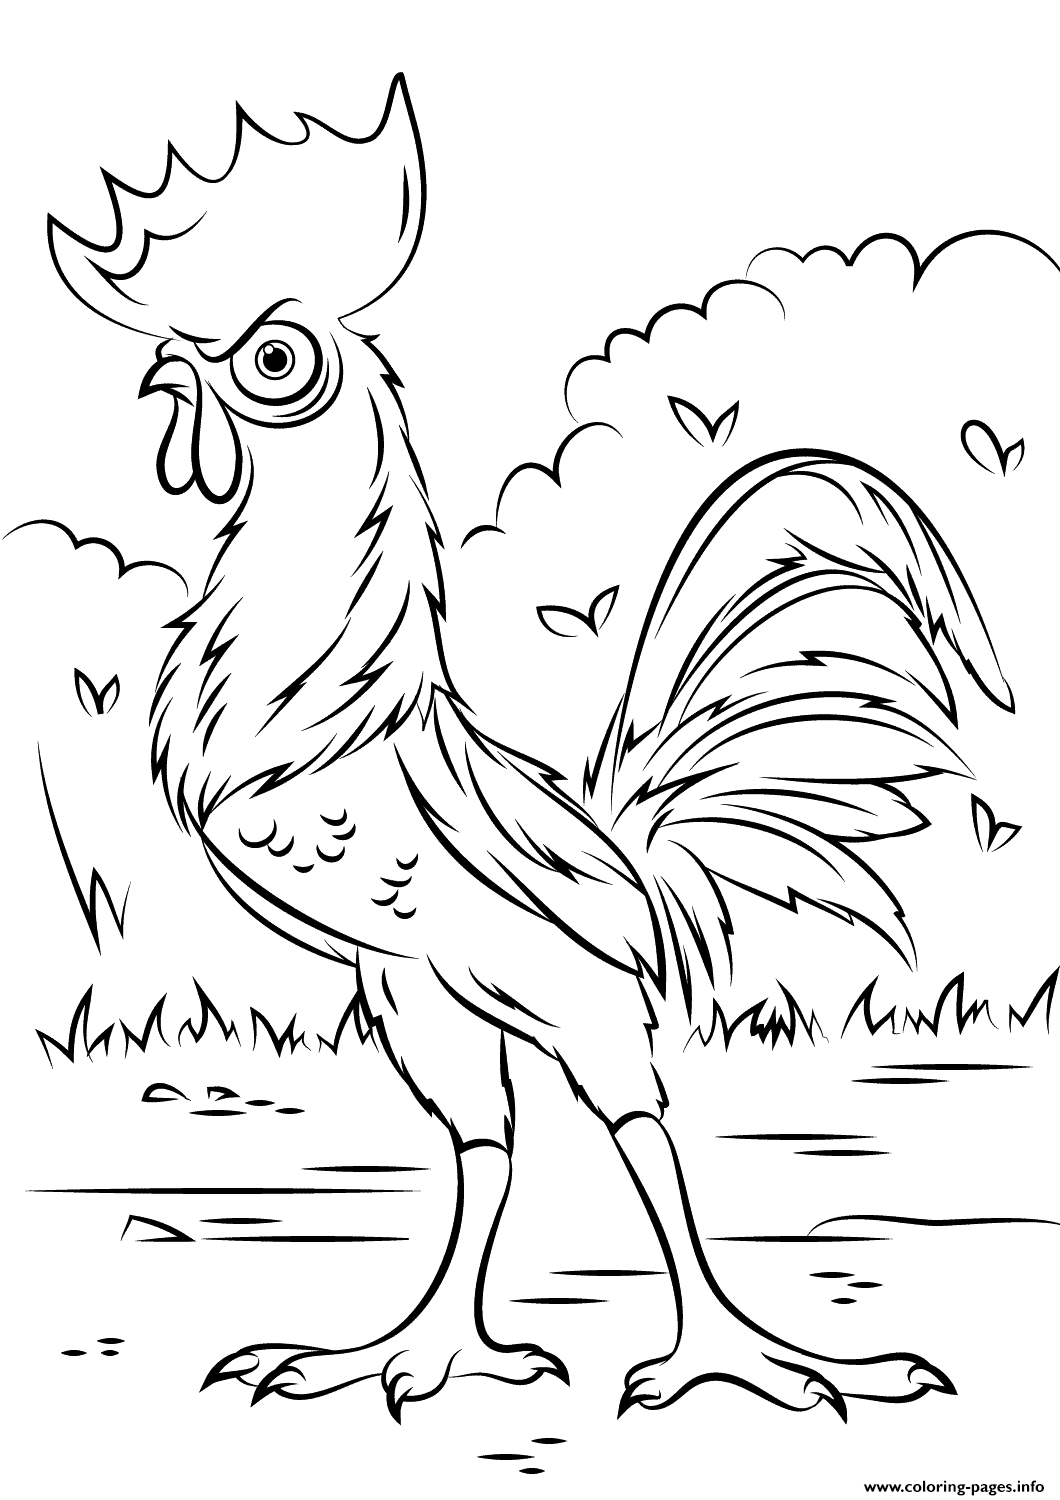 Heihei Rooster From Moana Disney  coloring